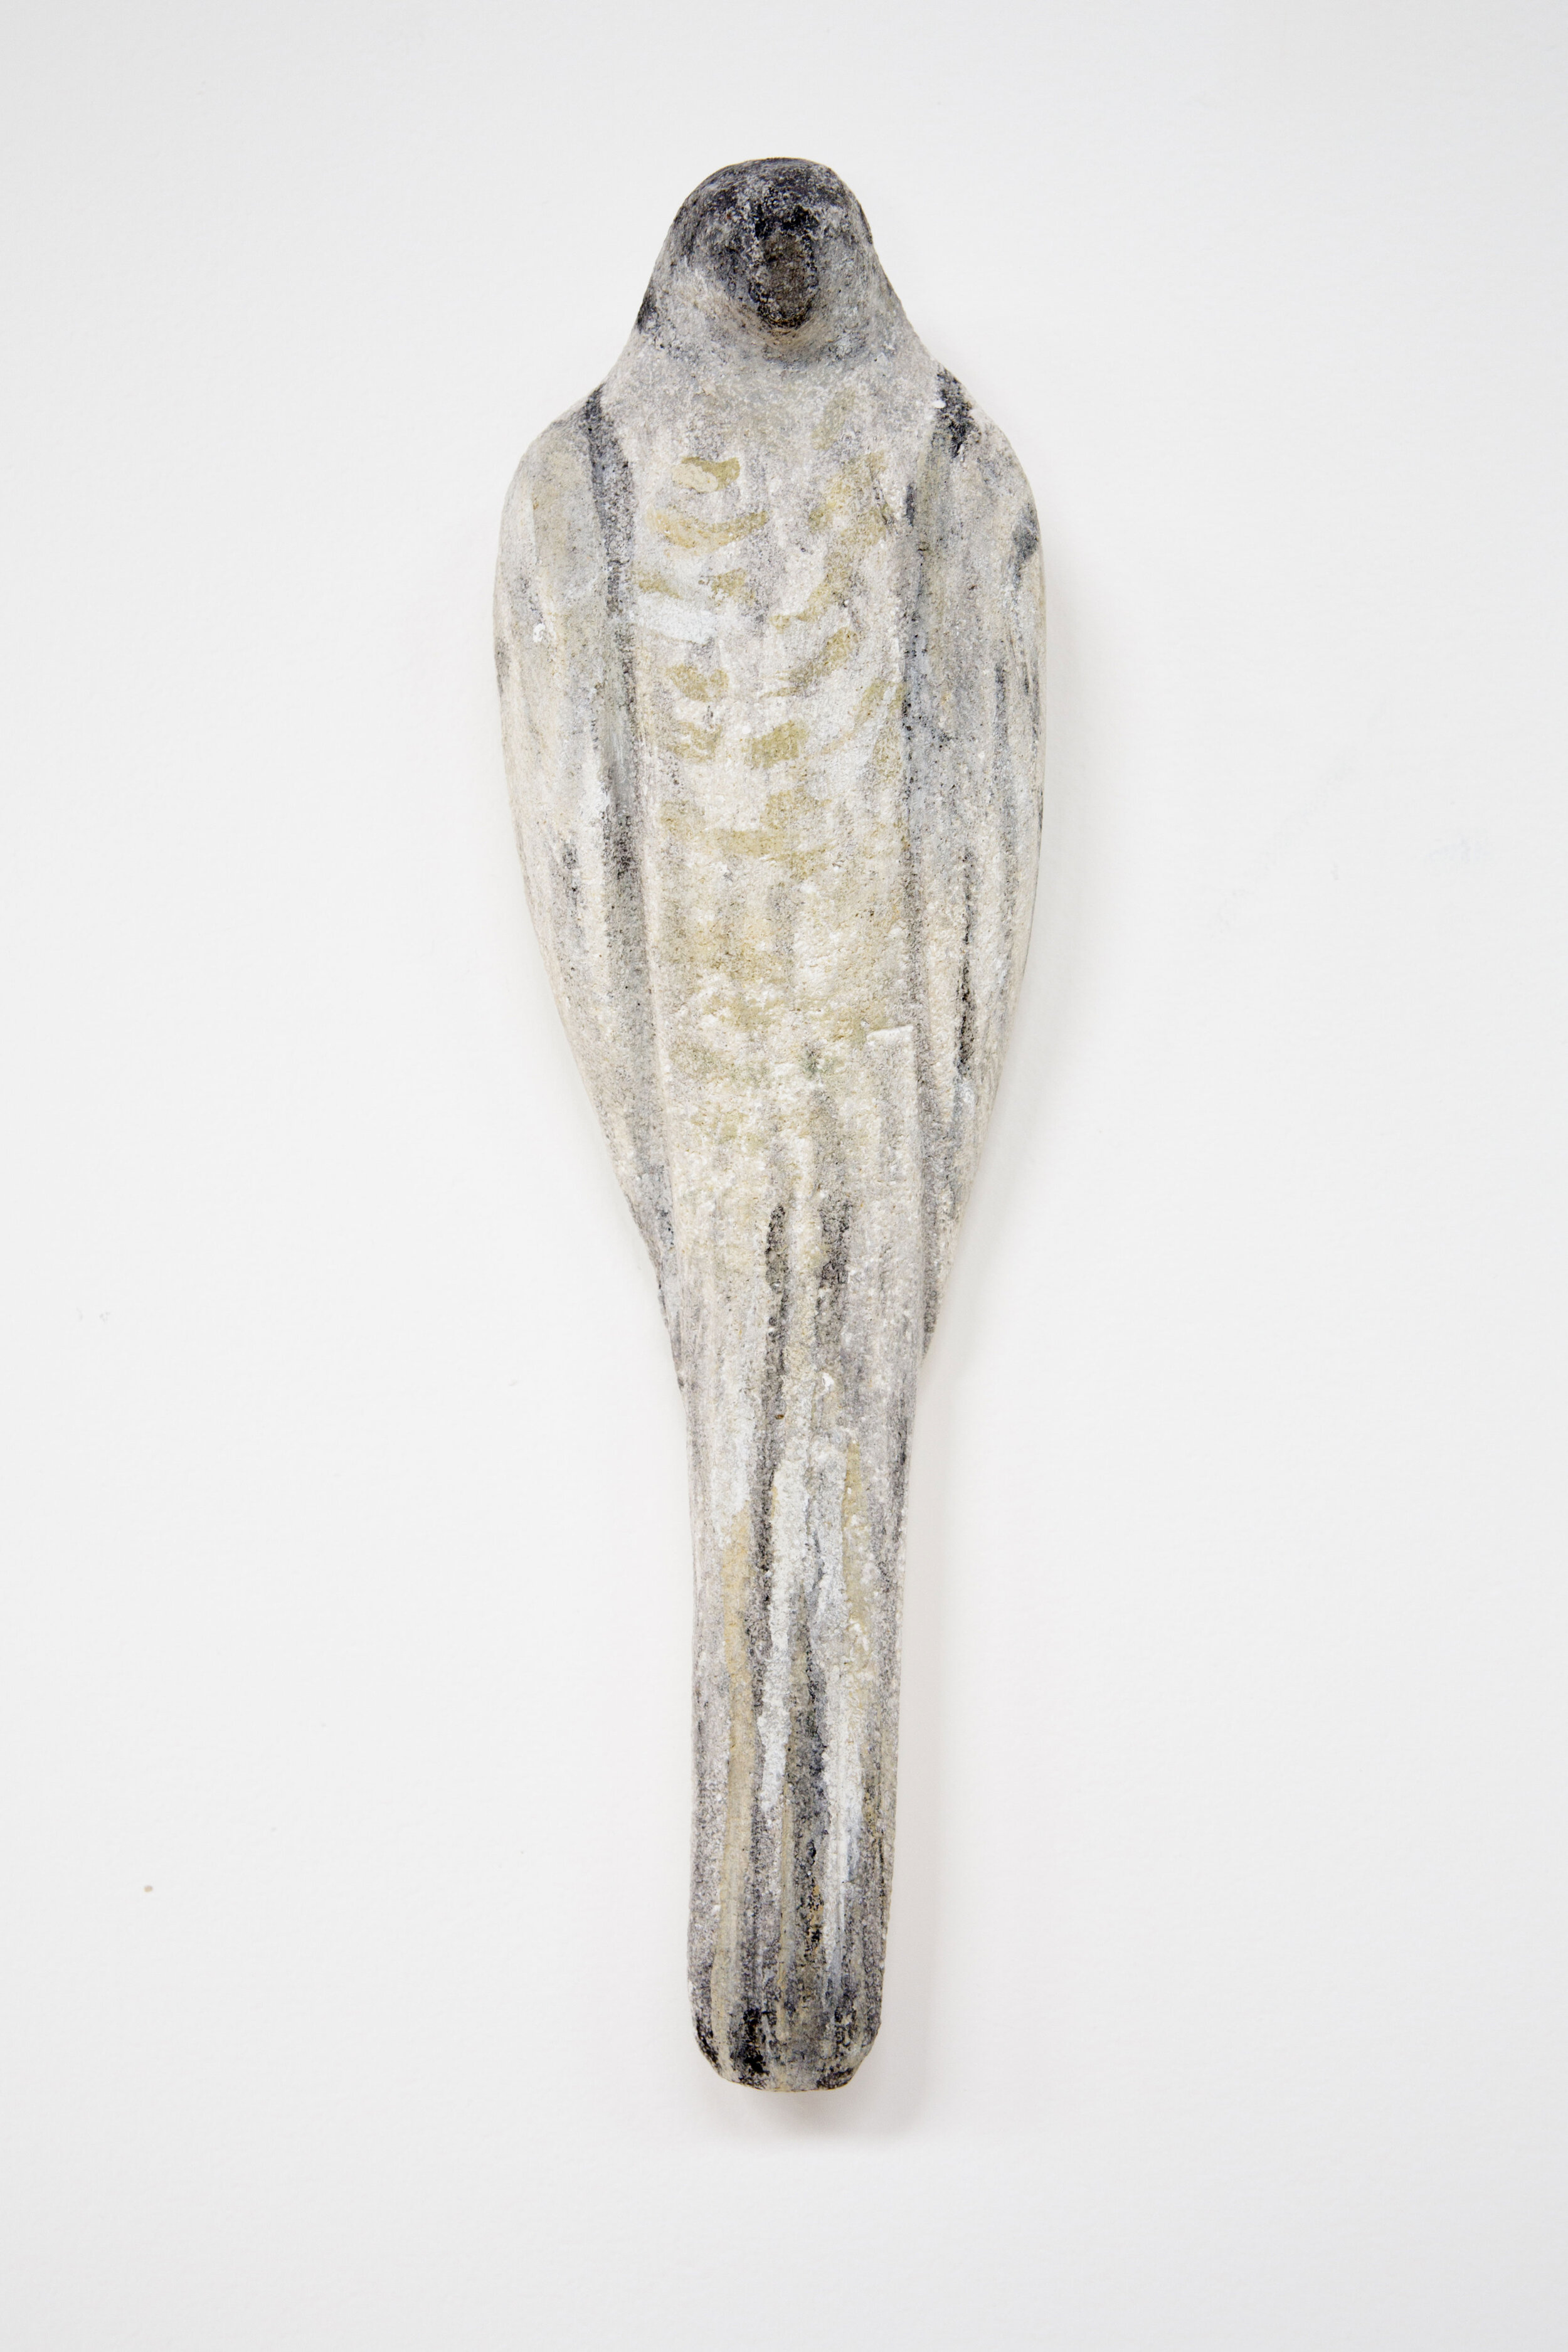  “Patterson Wall Bird,” 2019  Limestone, pigment and sumi ink 13 x 4 x 3 inches 